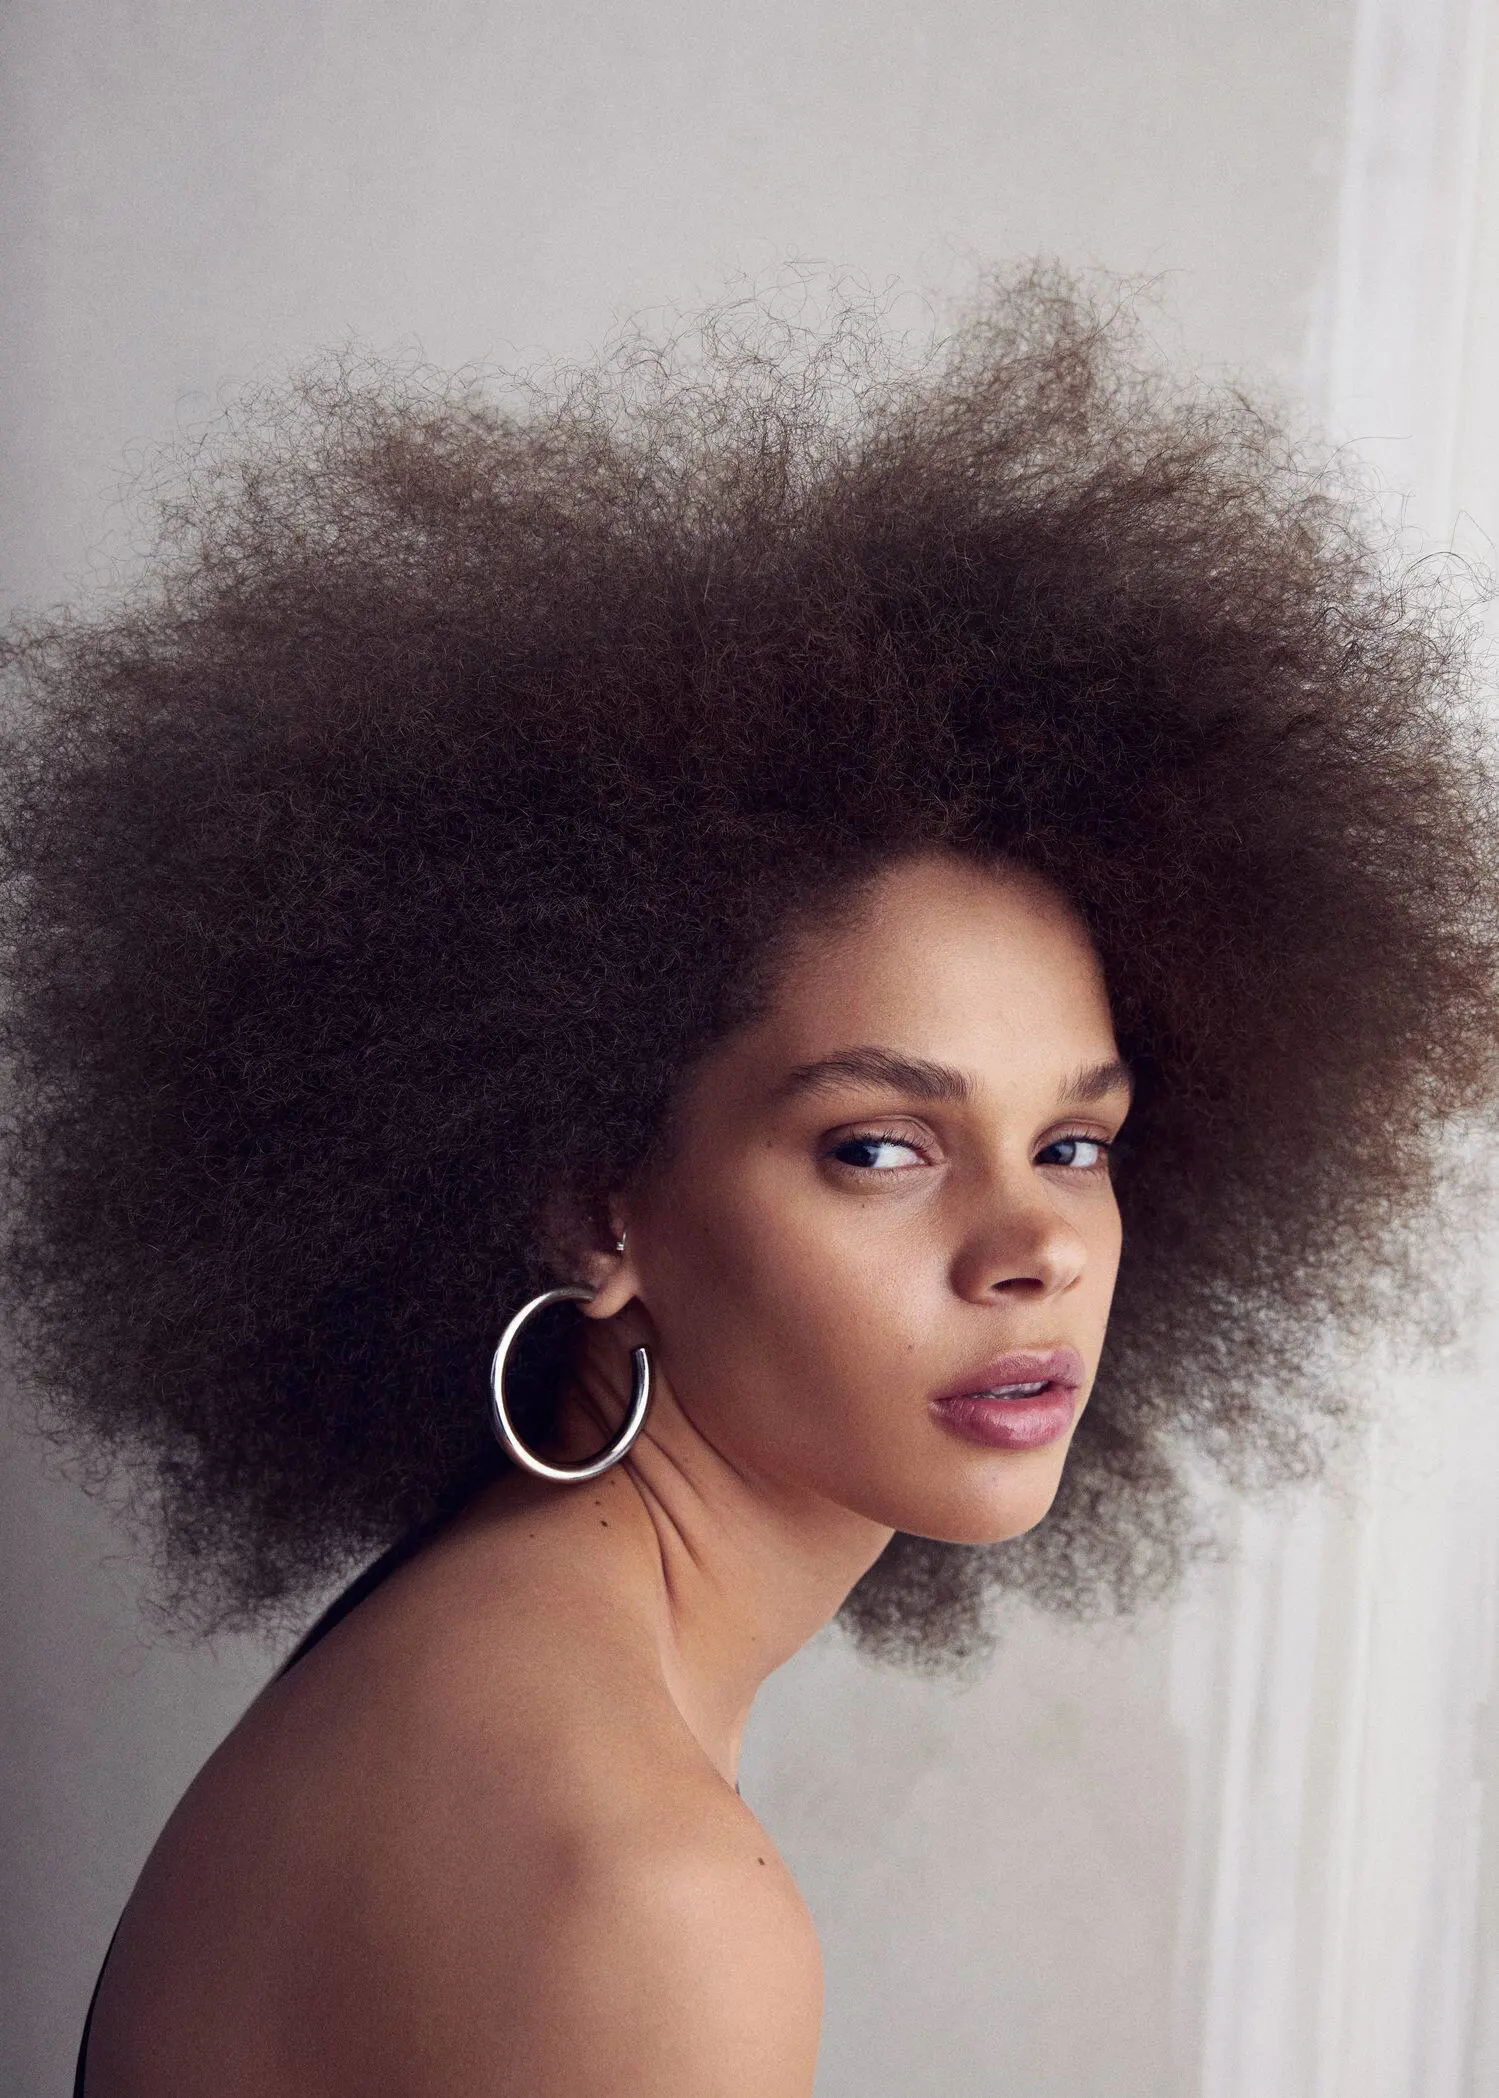 Mango Hoop earrings. a beautiful woman with a large afro hair style. 